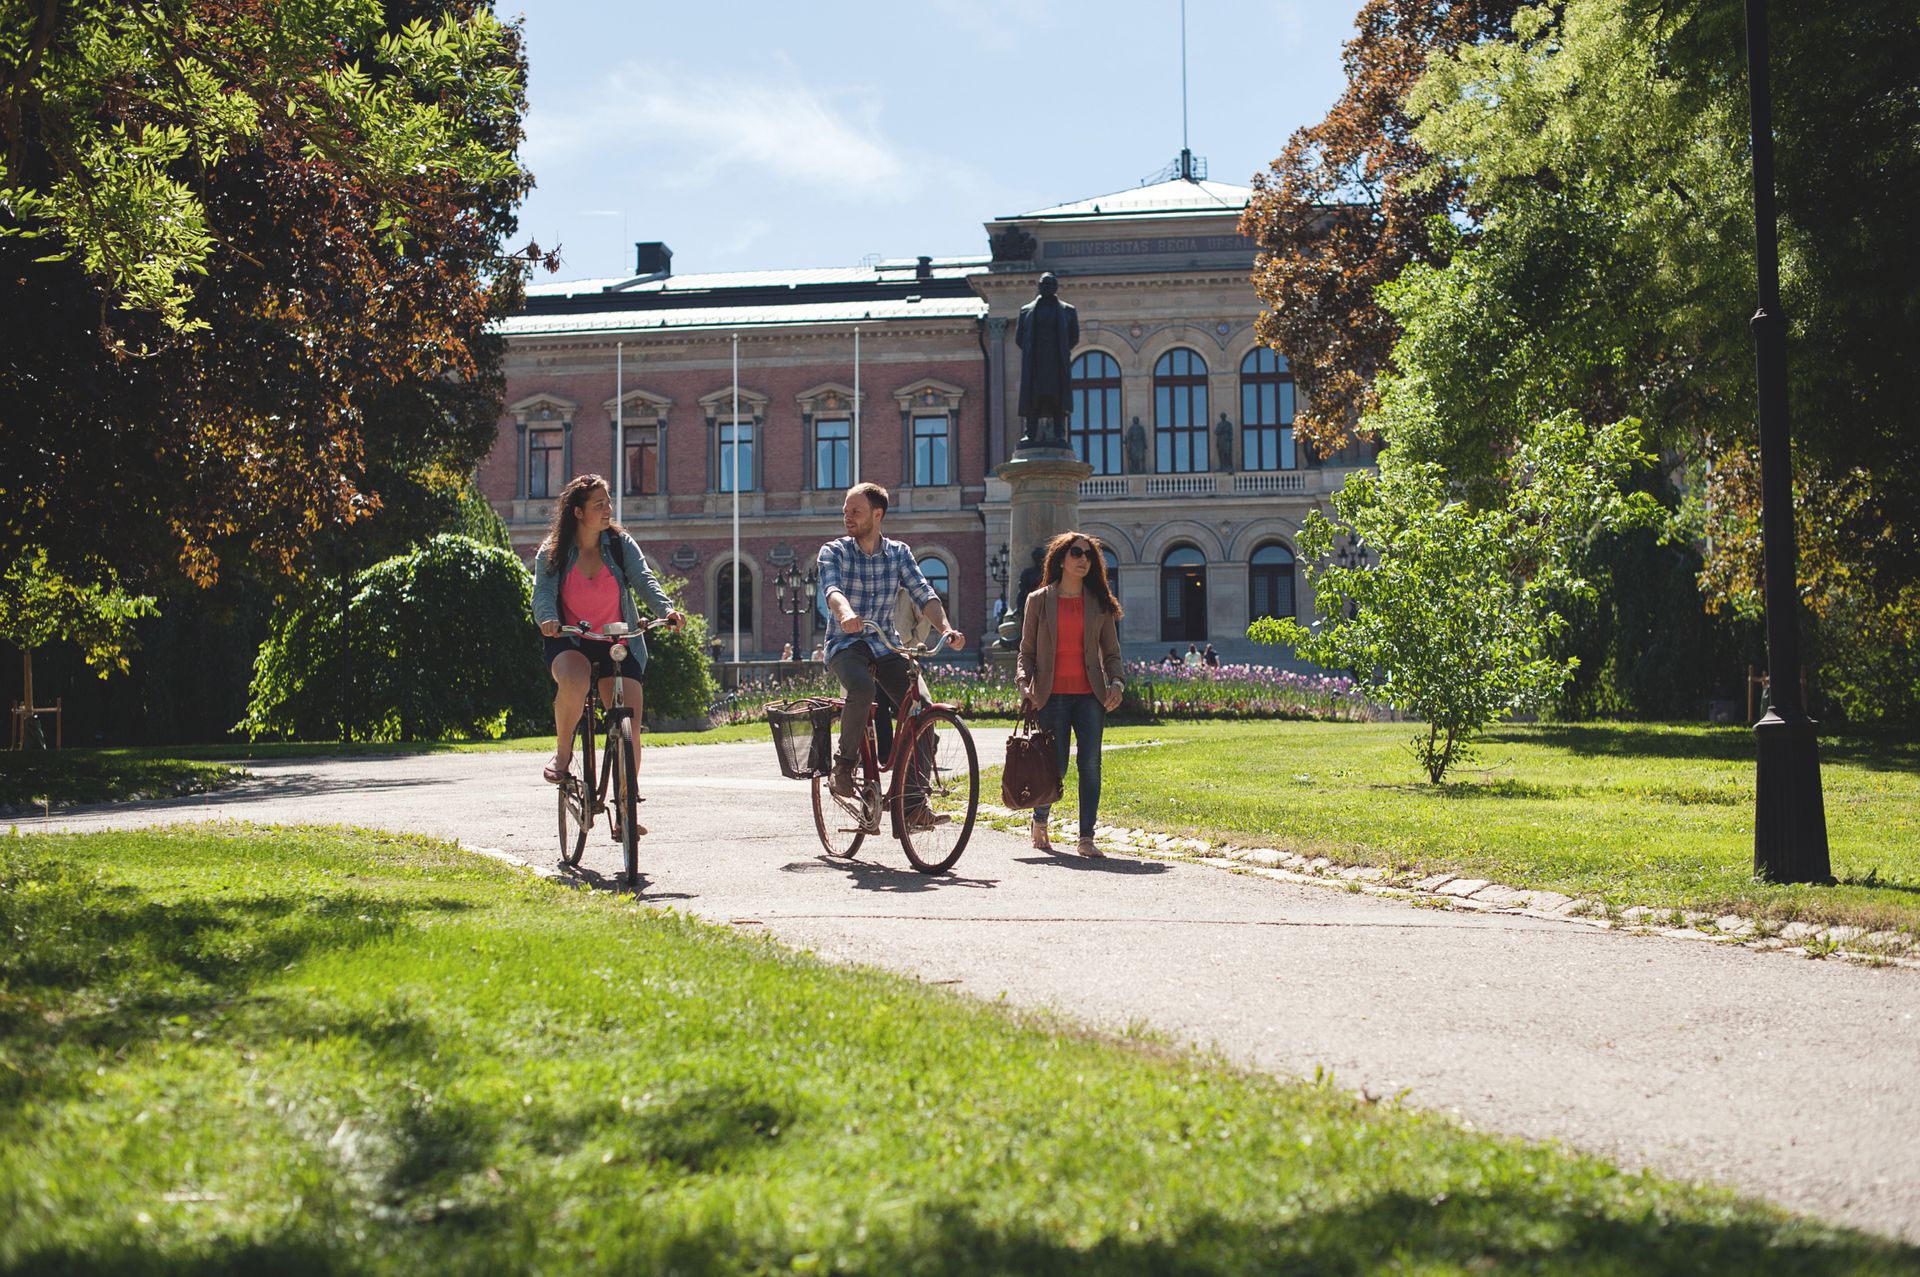 A man and a woman bike past a pedestrian woman at the Uppsala Univerity campus.